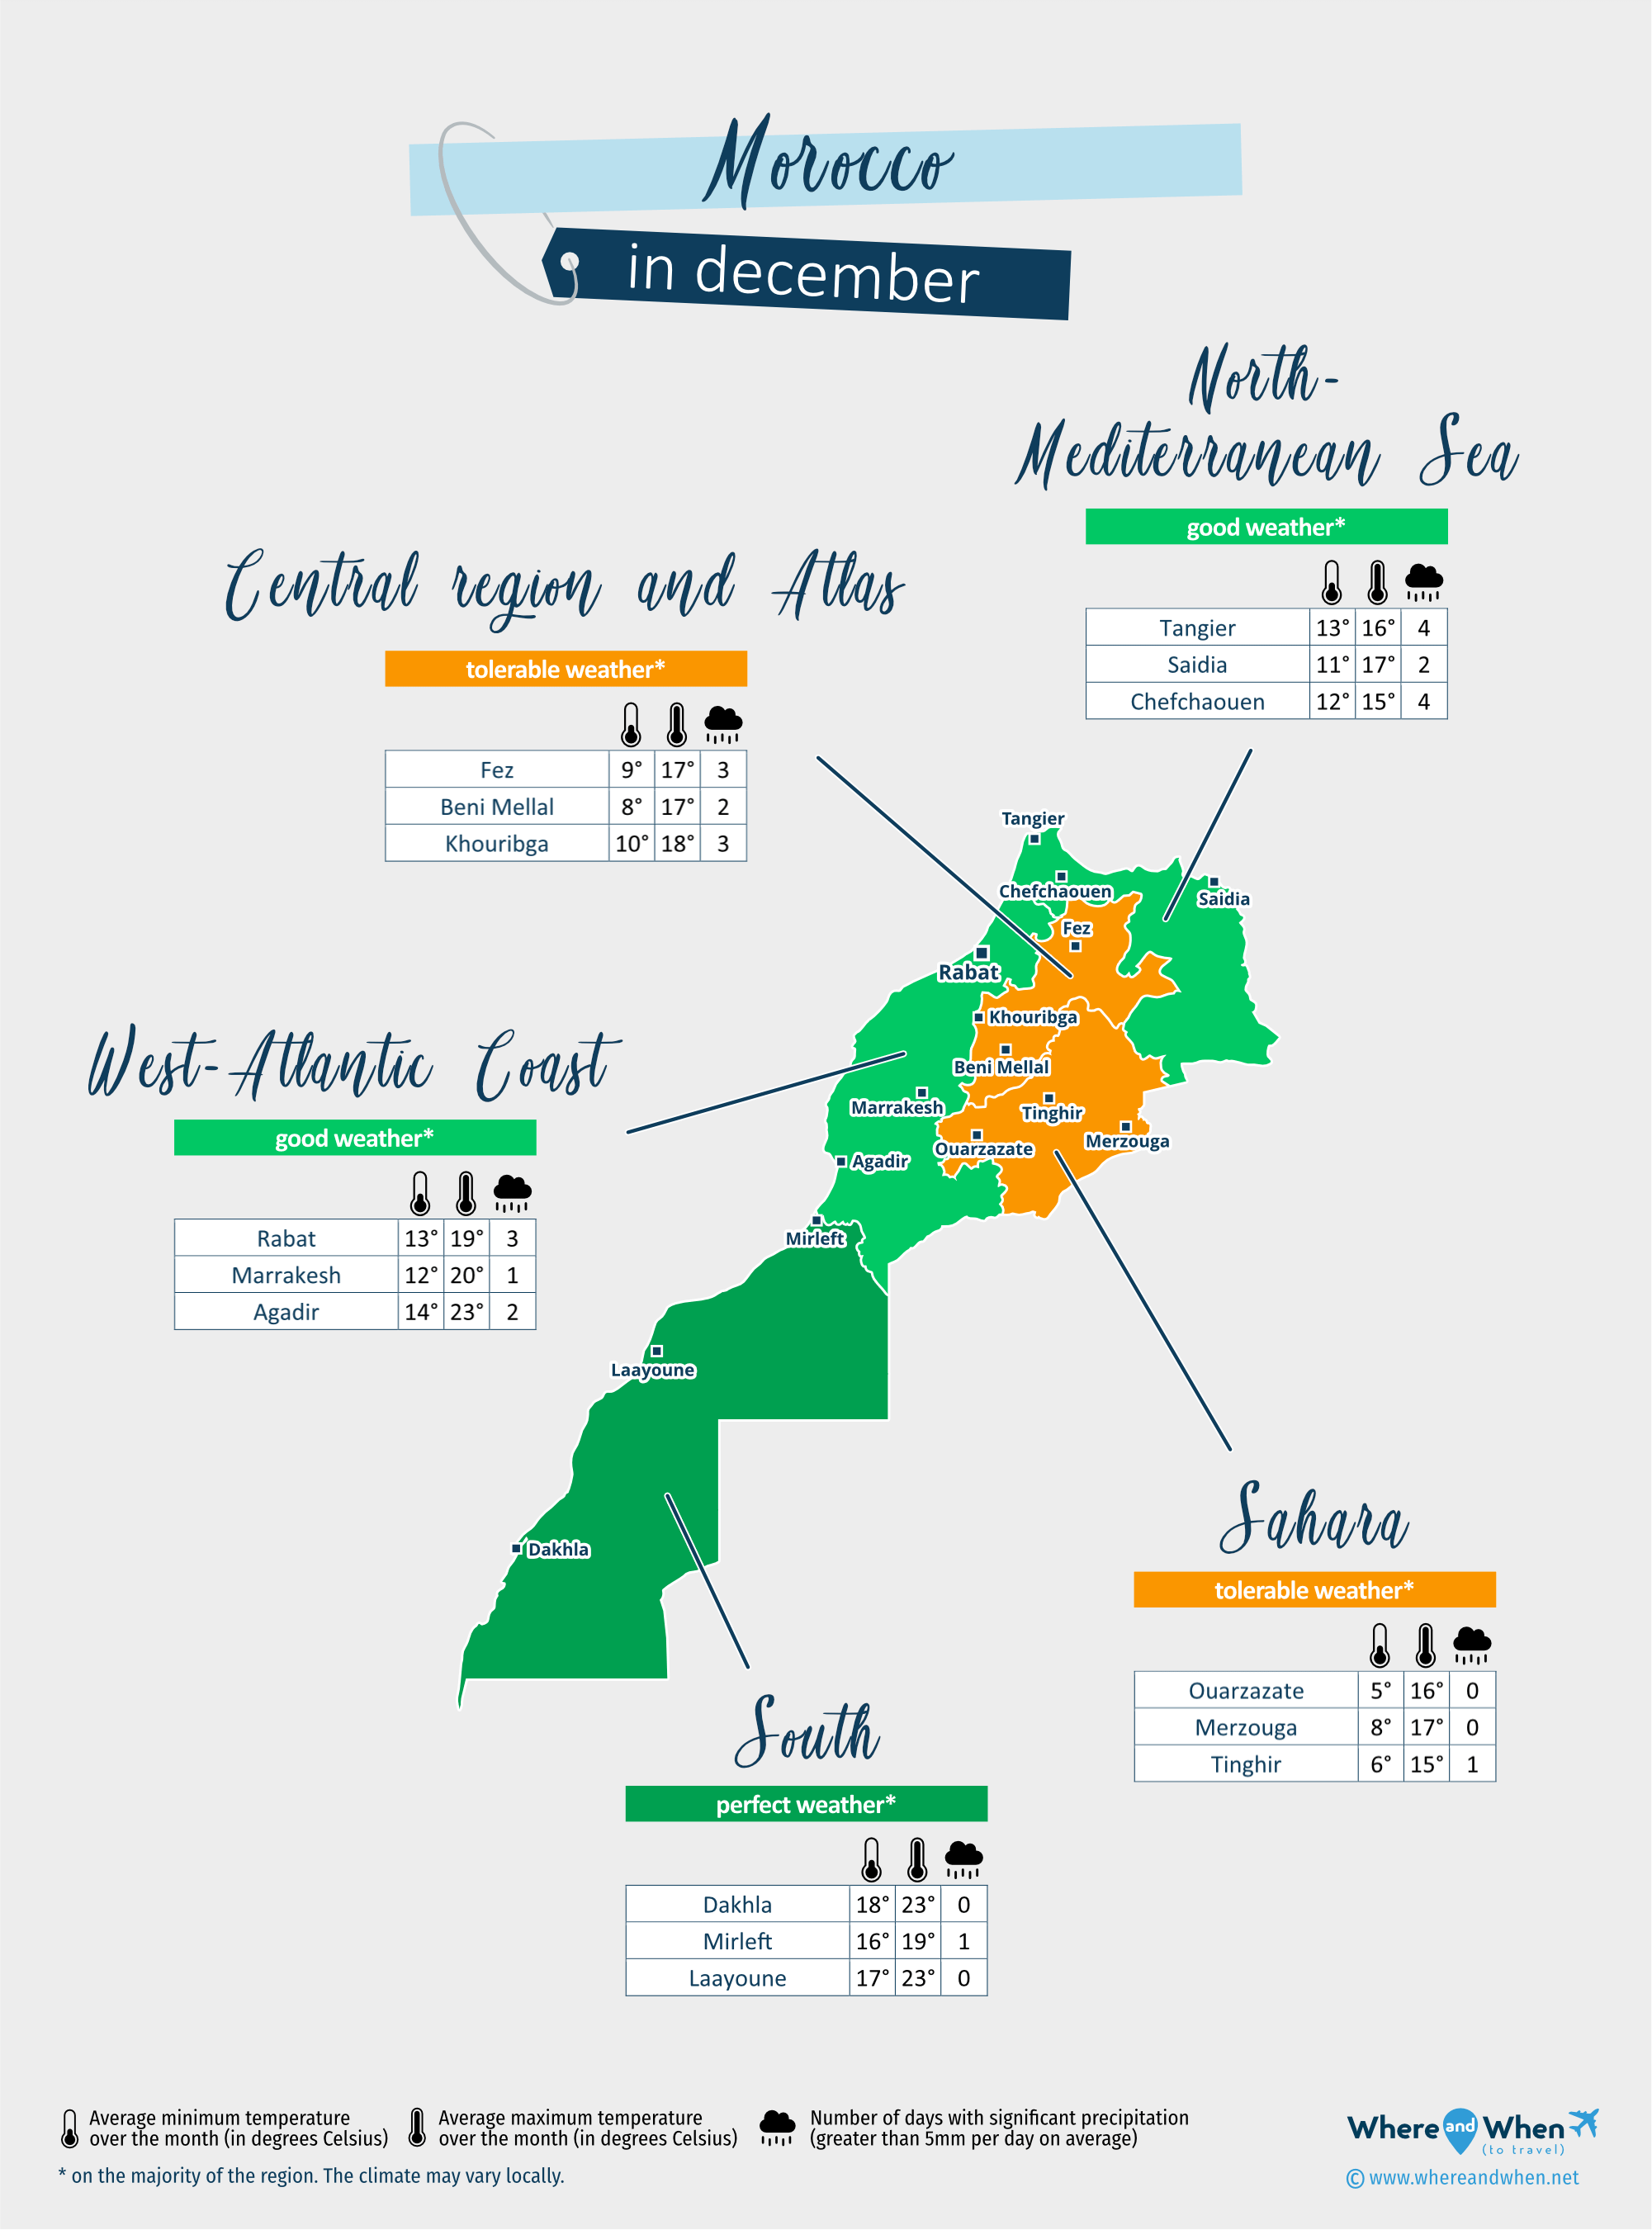 Morocco: weather map in december in different regions